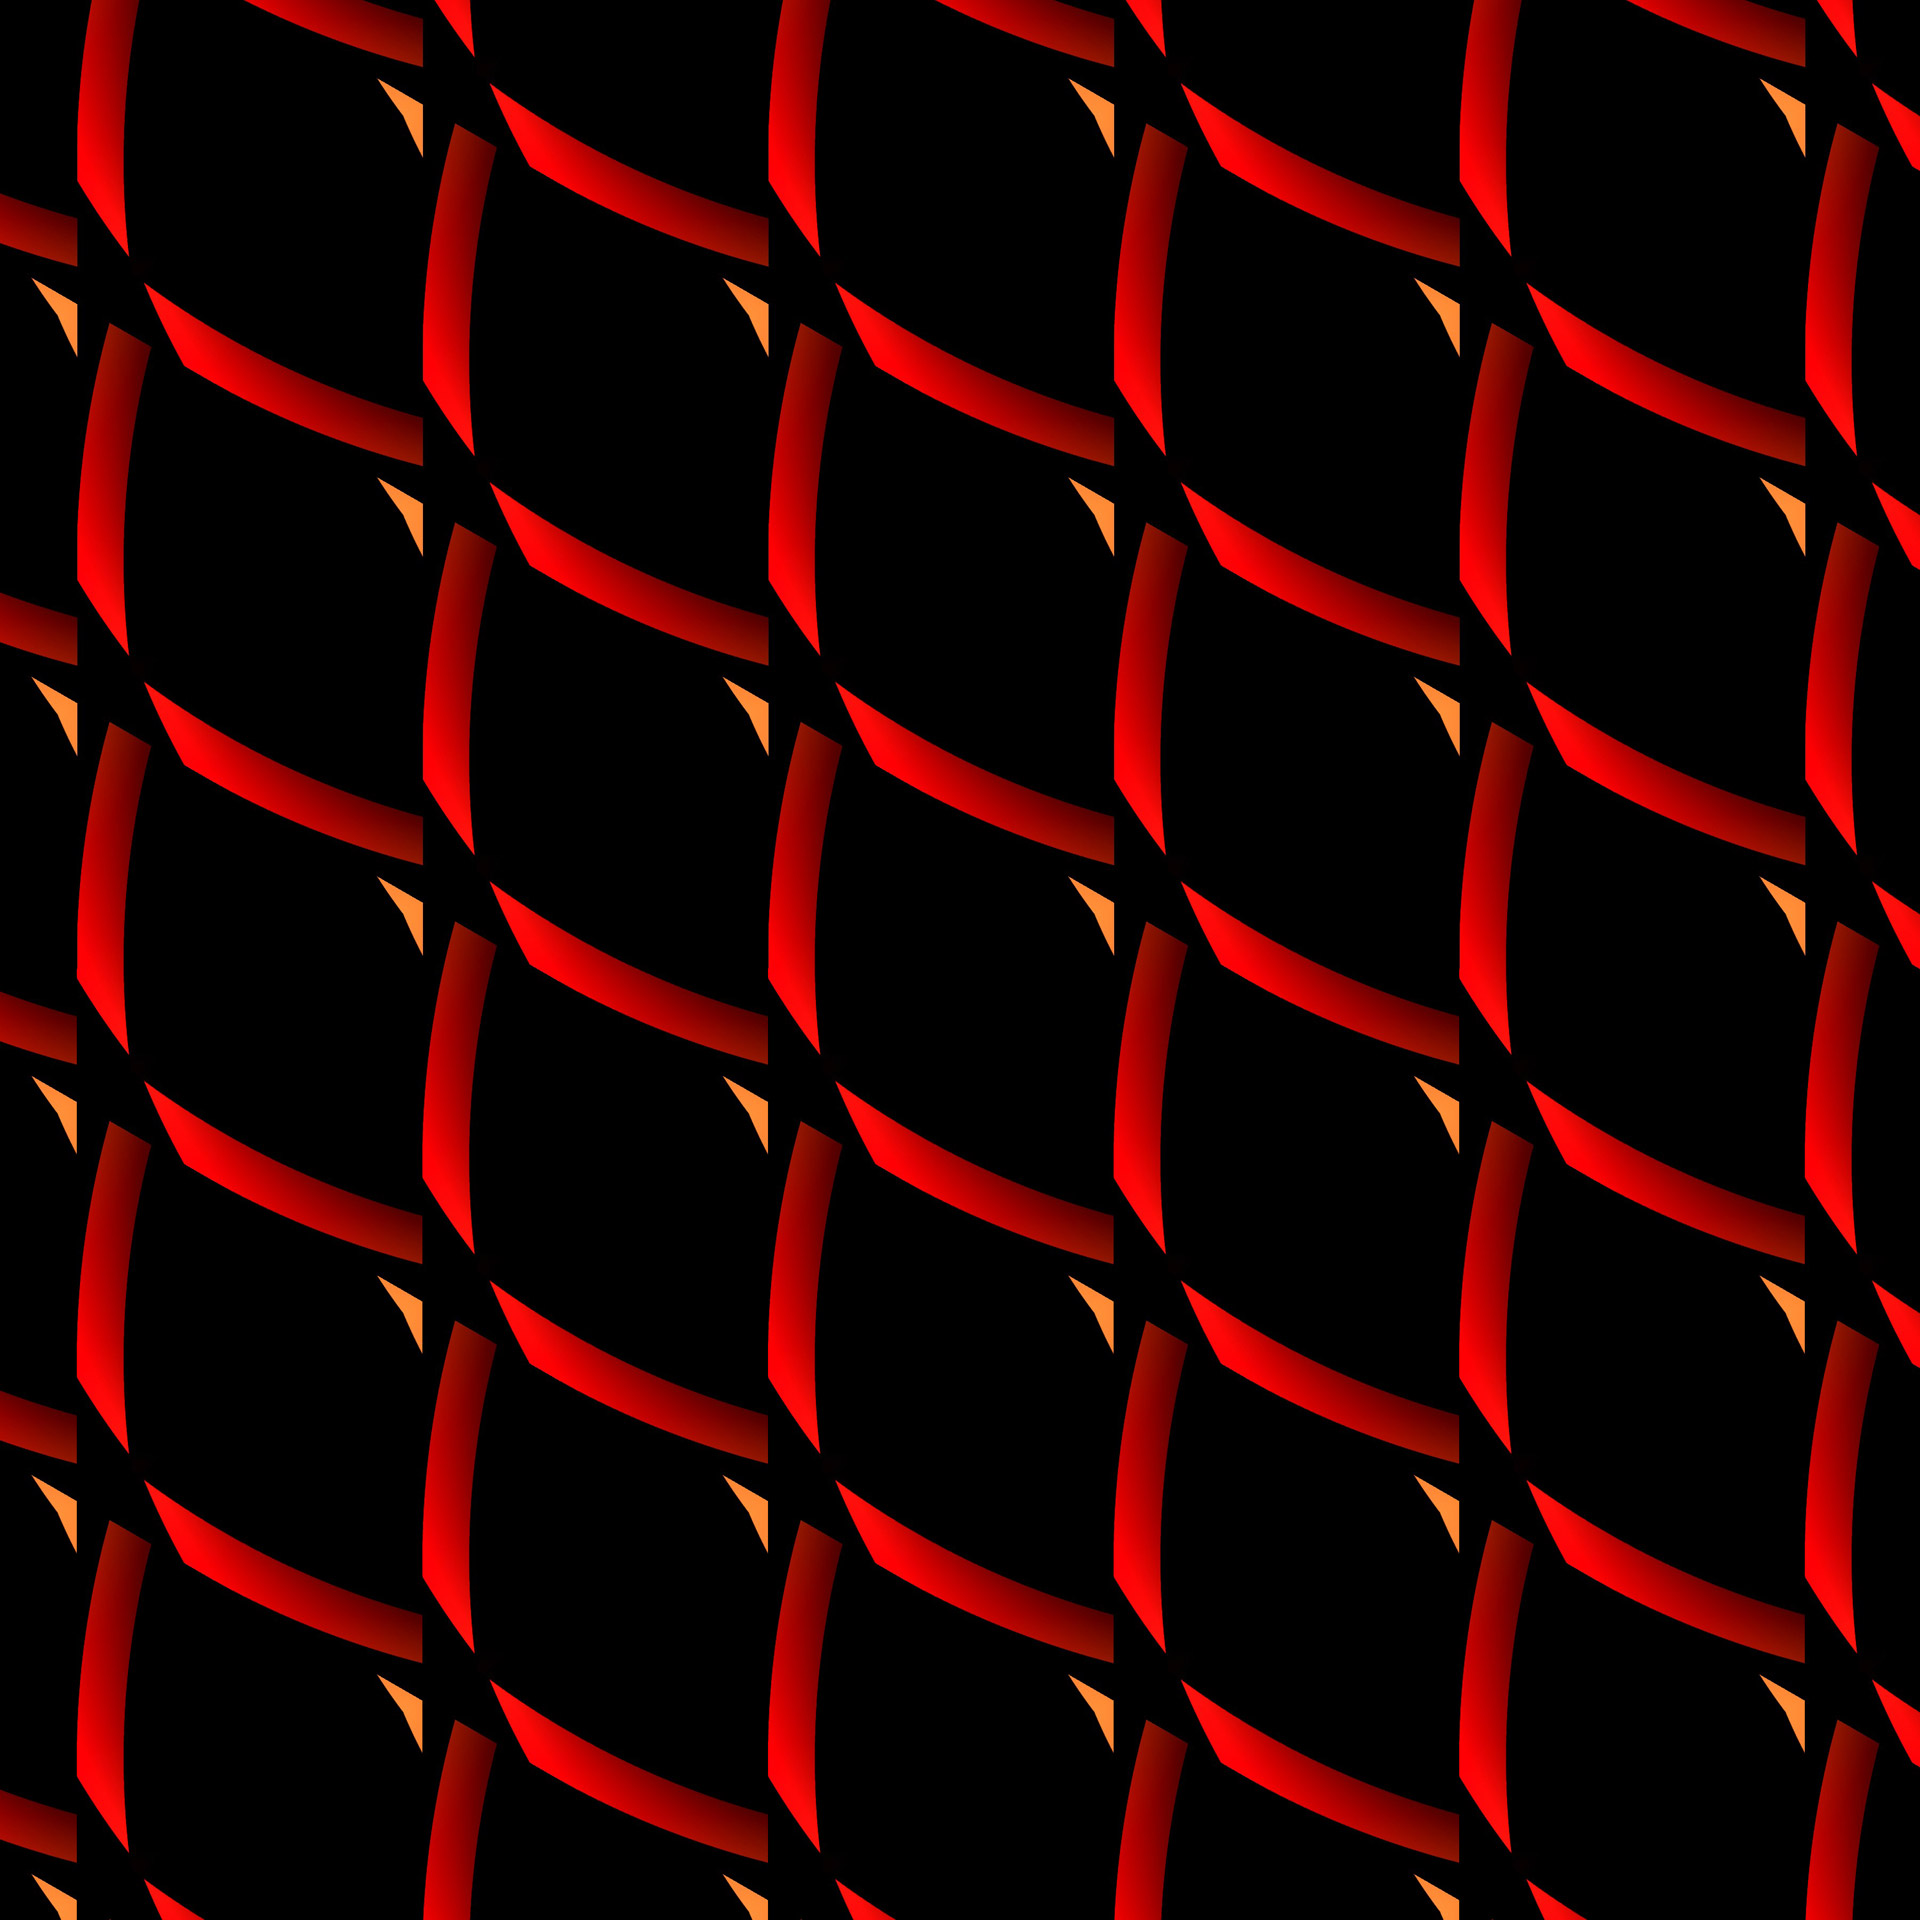 Black And Red Background # 1